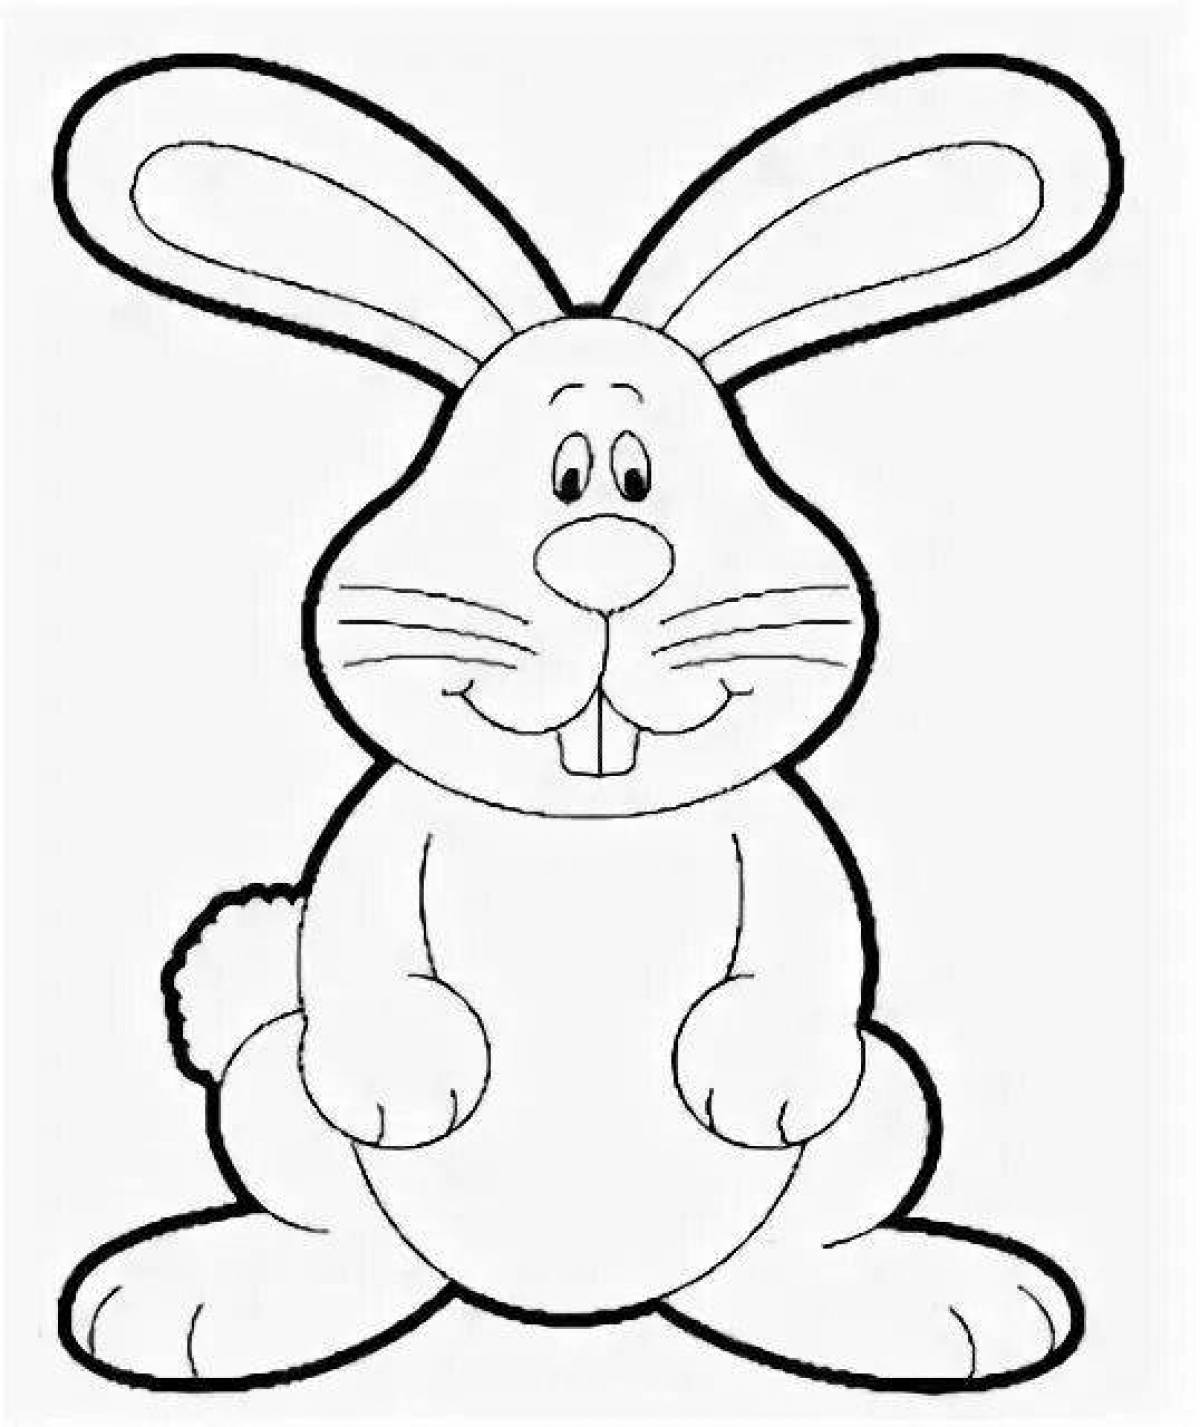 Coloring book happy hare